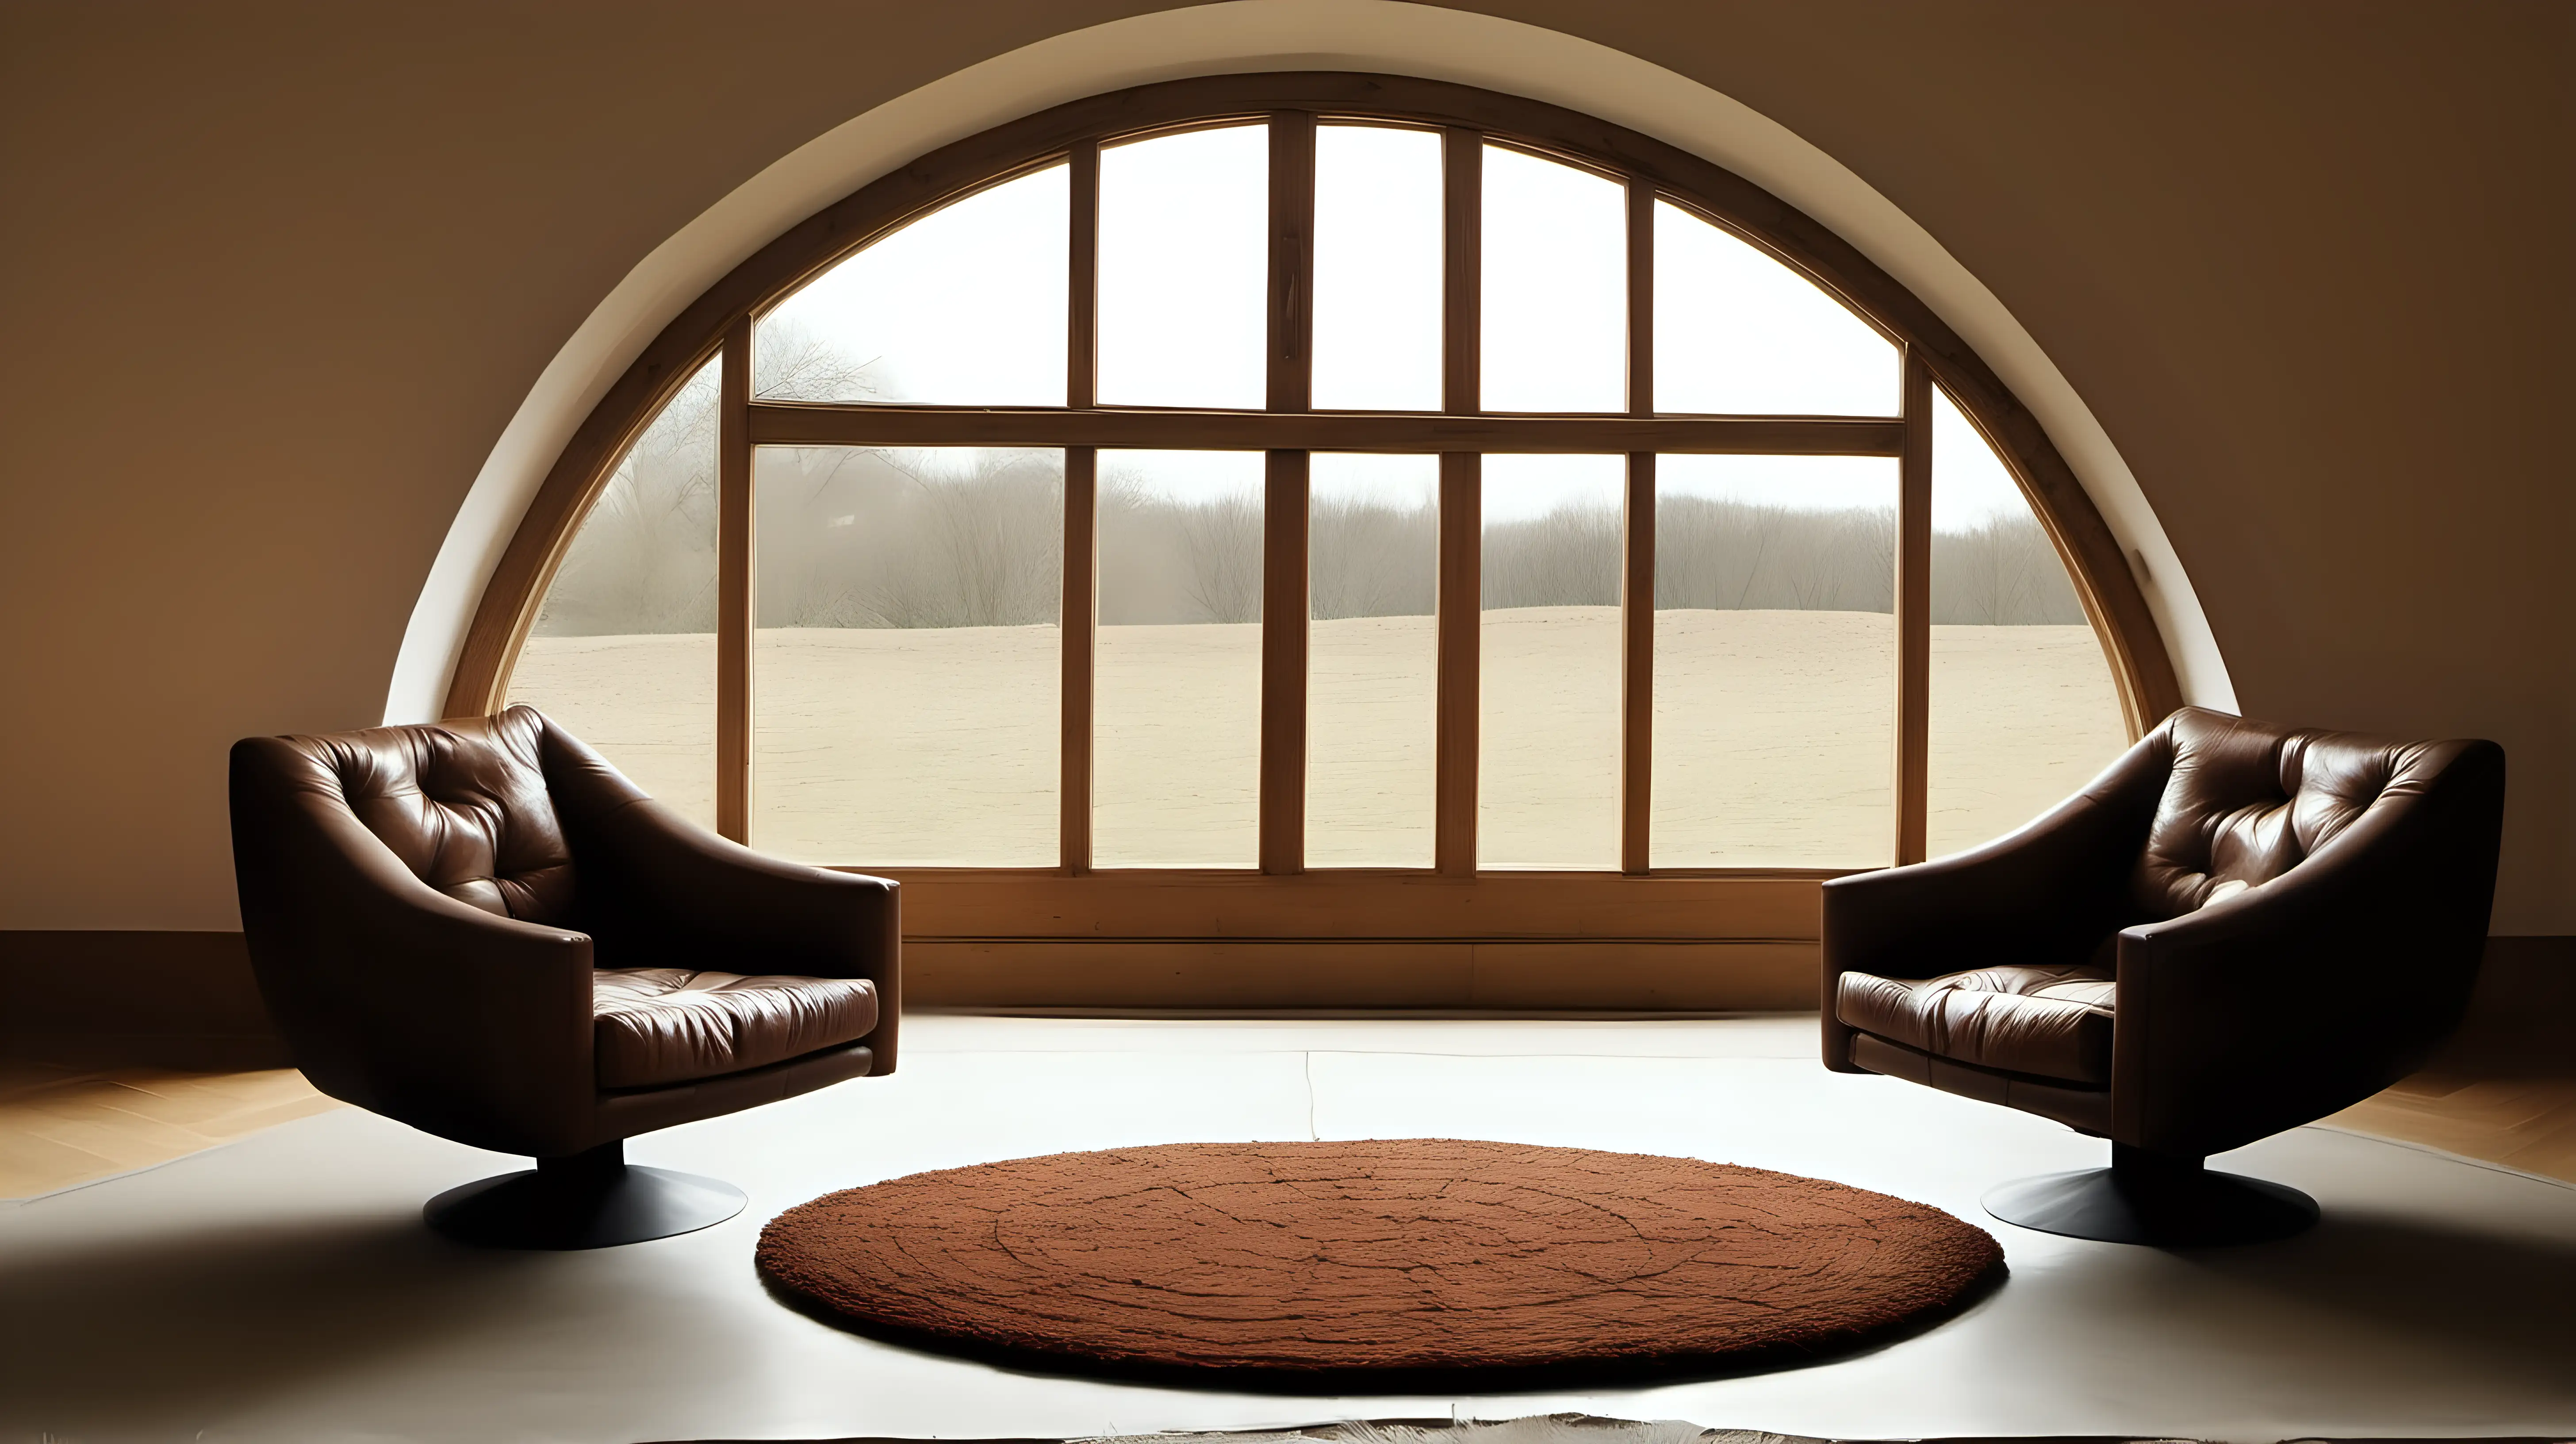 One large round window in a wall with an oak frame. Two leather armchairs facing each other before the window, a thick wool rug on the floor. Photographic quality, warm lighting.